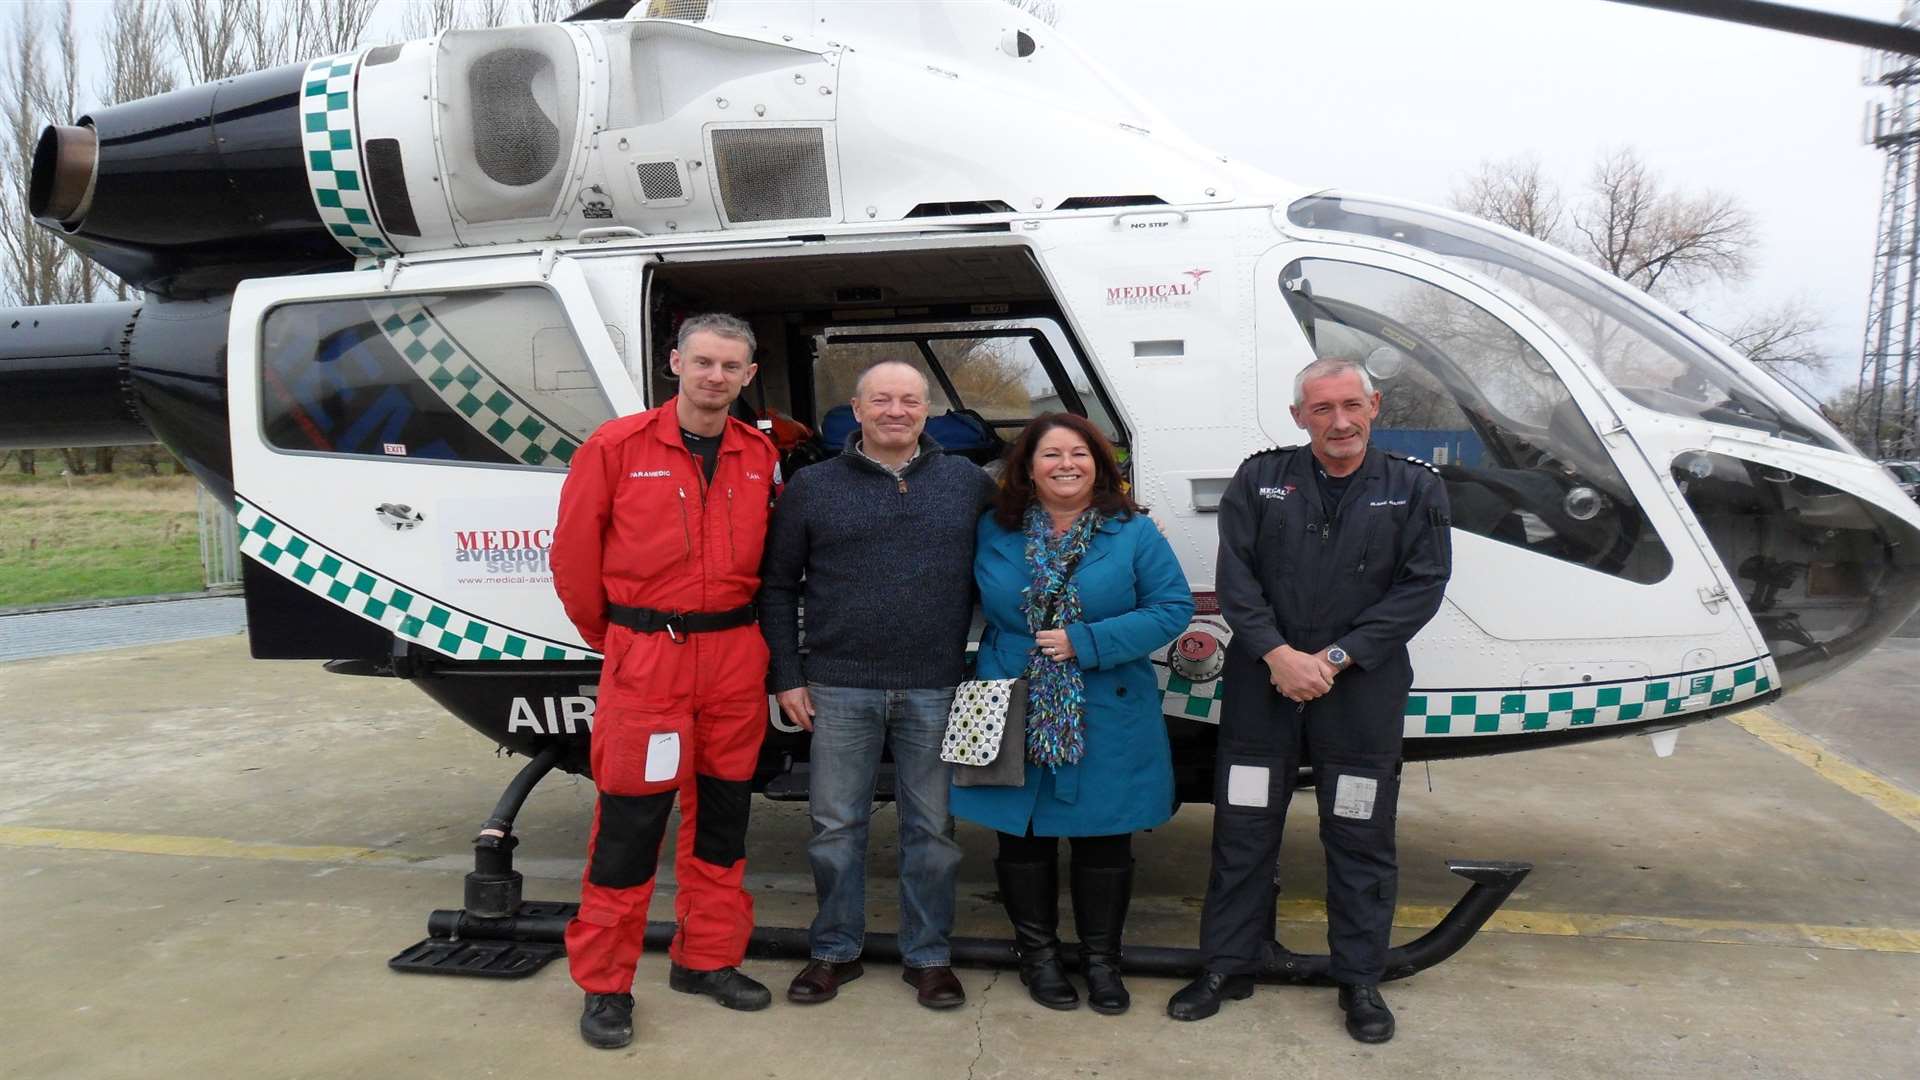 Air ambulance paramedic Alan Cowley, John and Alison Willoughby, and chief pilot, Captain Blaine Ashurst